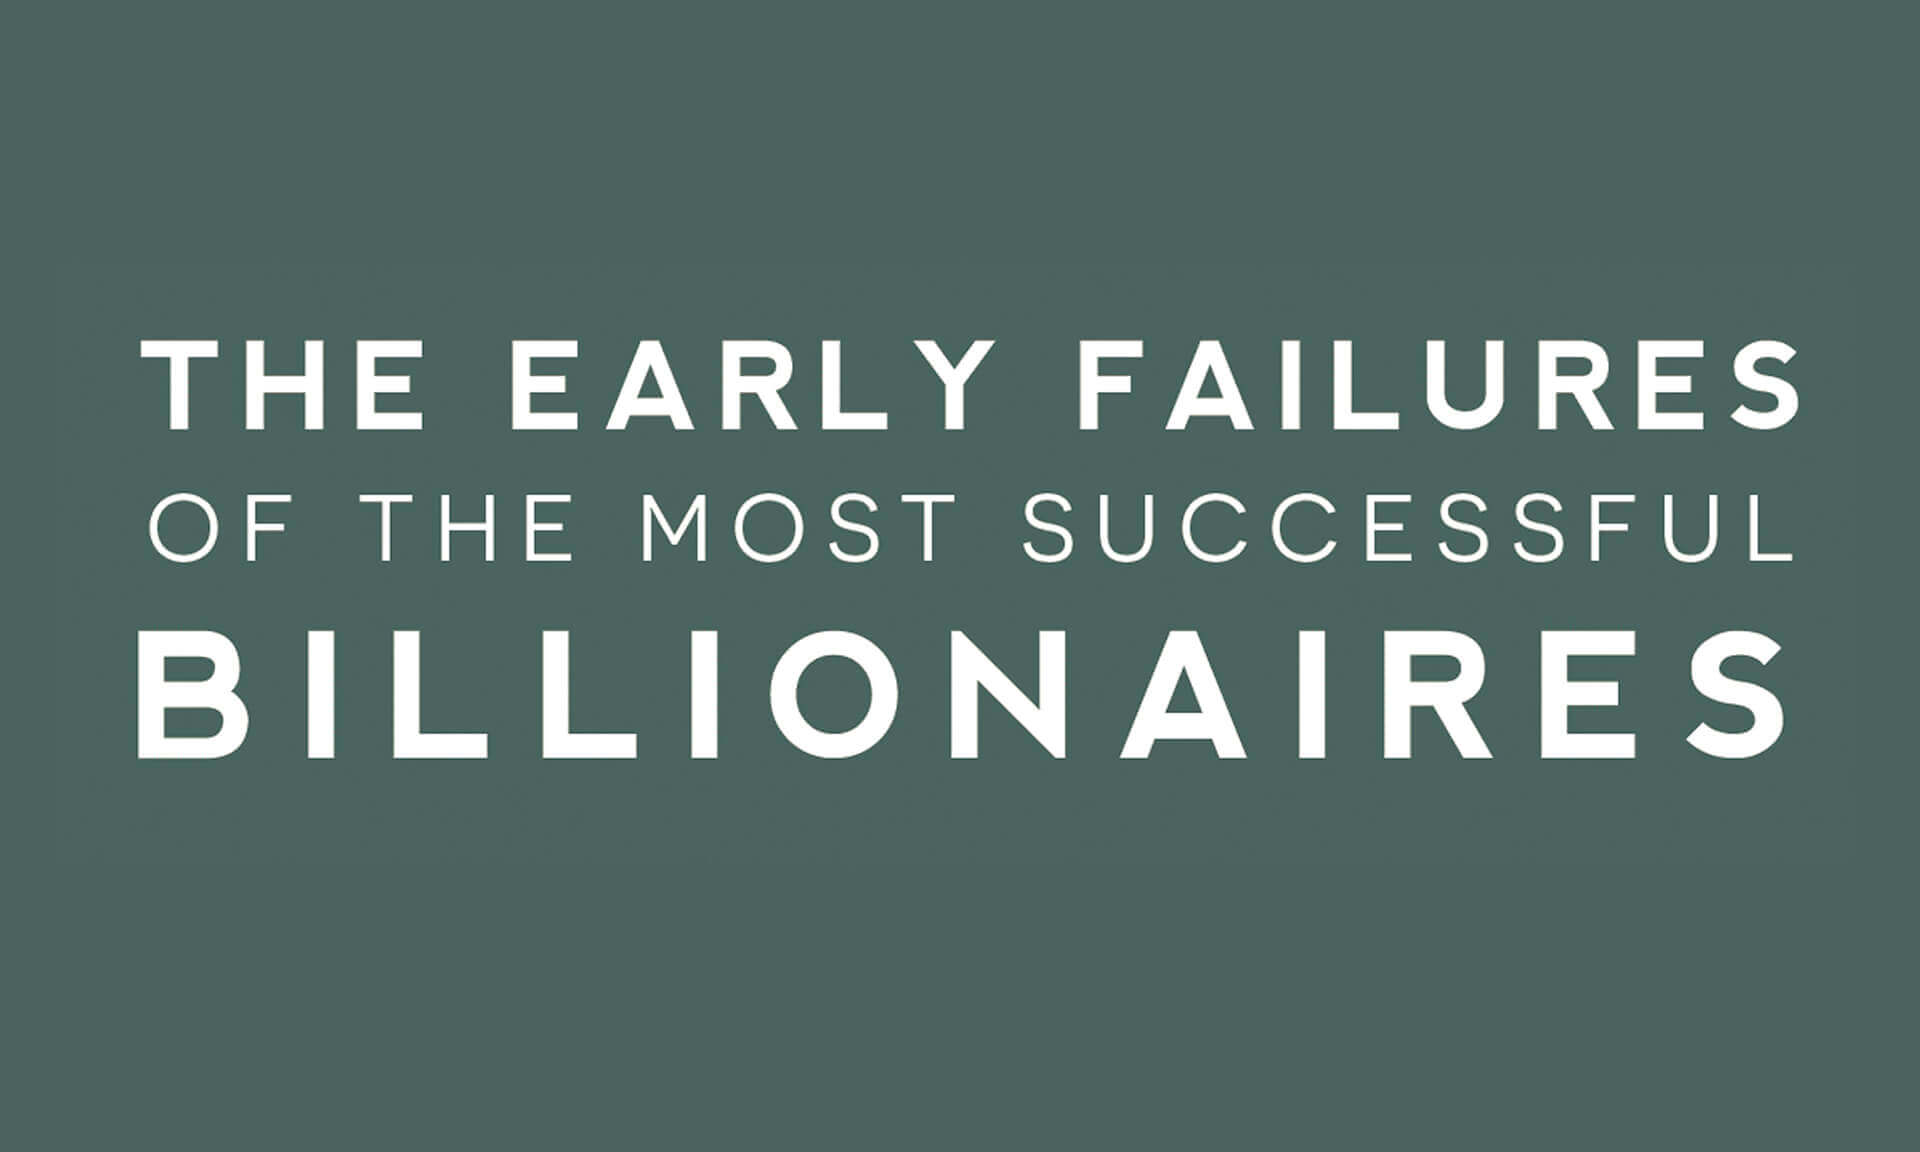 Top Lessons on Failure from Billionaires